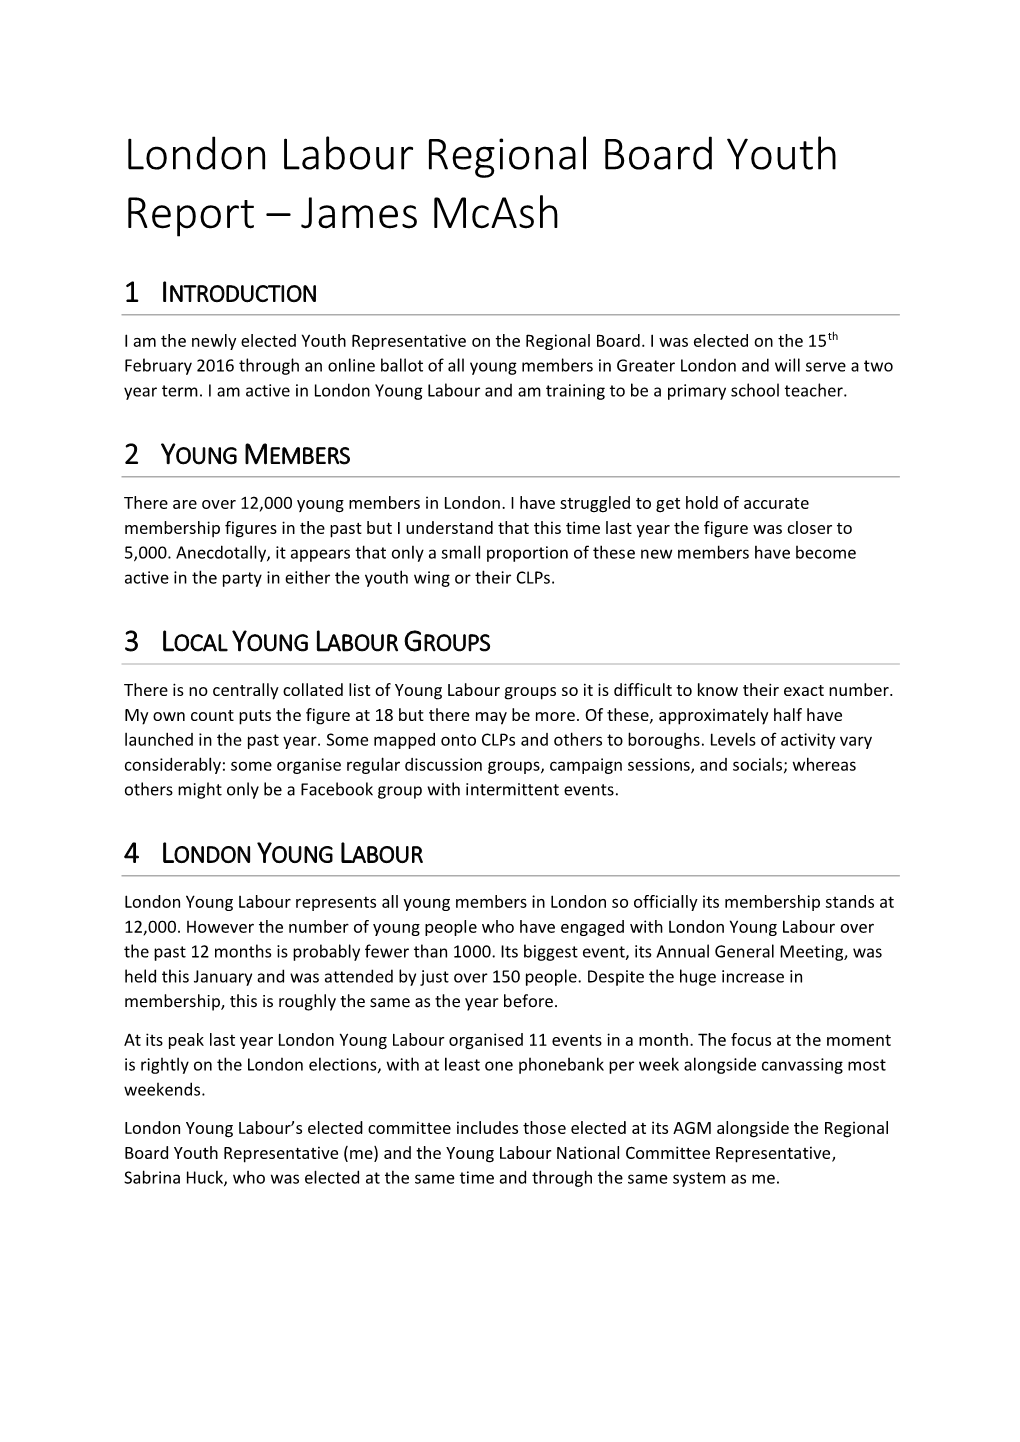 London Labour Regional Board Youth Report – James Mcash